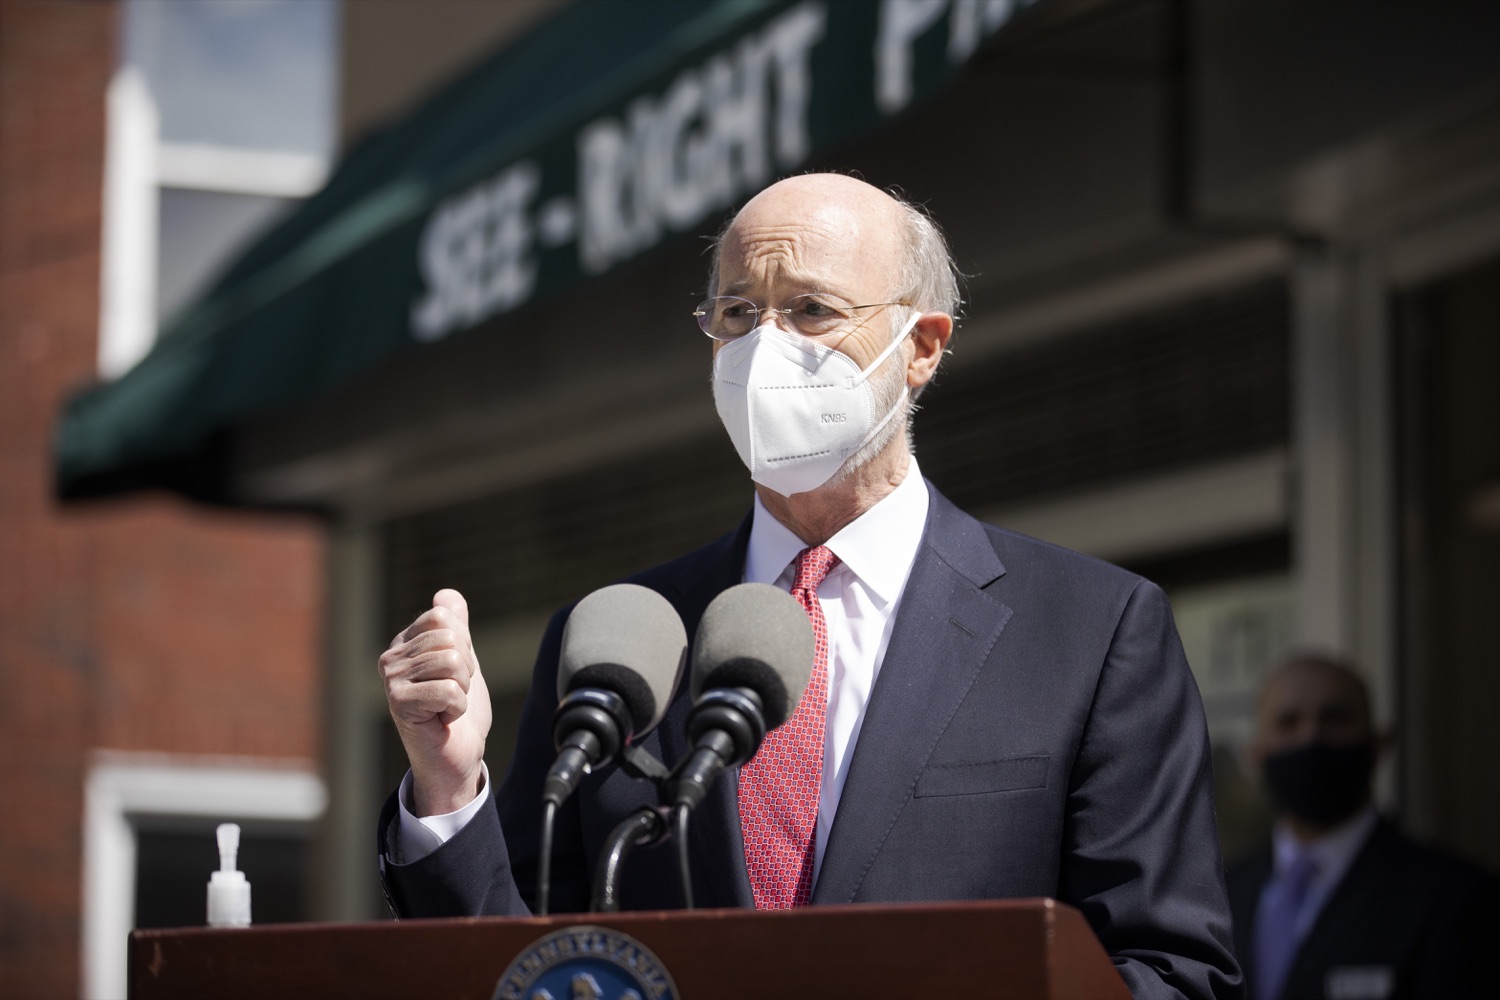 Pennsylvania Governor Tom Wolf speaking with the press.  Governor Tom Wolf today visited See-Right Pharmacy in Harrisburg to learn more about how the local, neighborhood pharmacy is vaccinating community members and to talk about COVID-19 vaccine hesitancy in Pennsylvania. Harrisburg, PA  April 22, 2021<br><a href="https://filesource.amperwave.net/commonwealthofpa/photo/18704_gov_seeRight_dz_005.jpg" target="_blank">⇣ Download Photo</a>